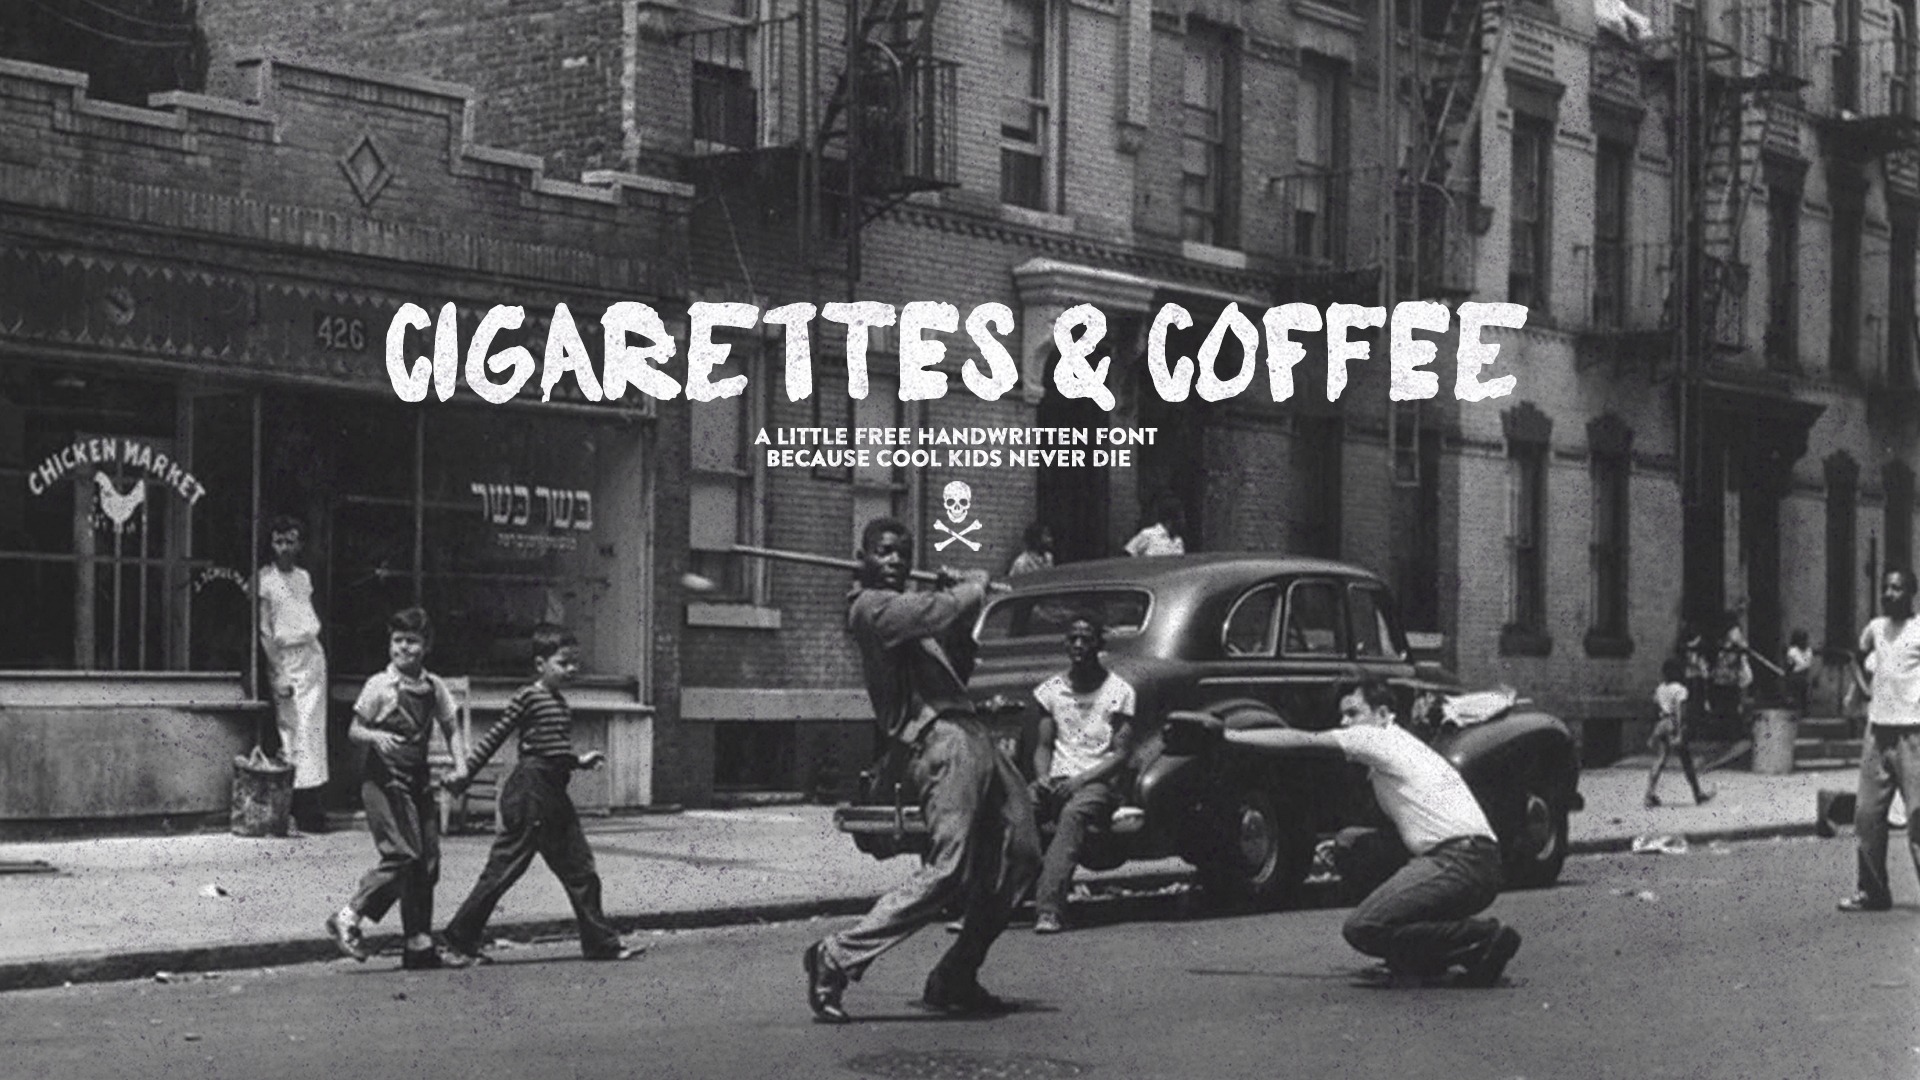 Police Cigarettes and Coffee